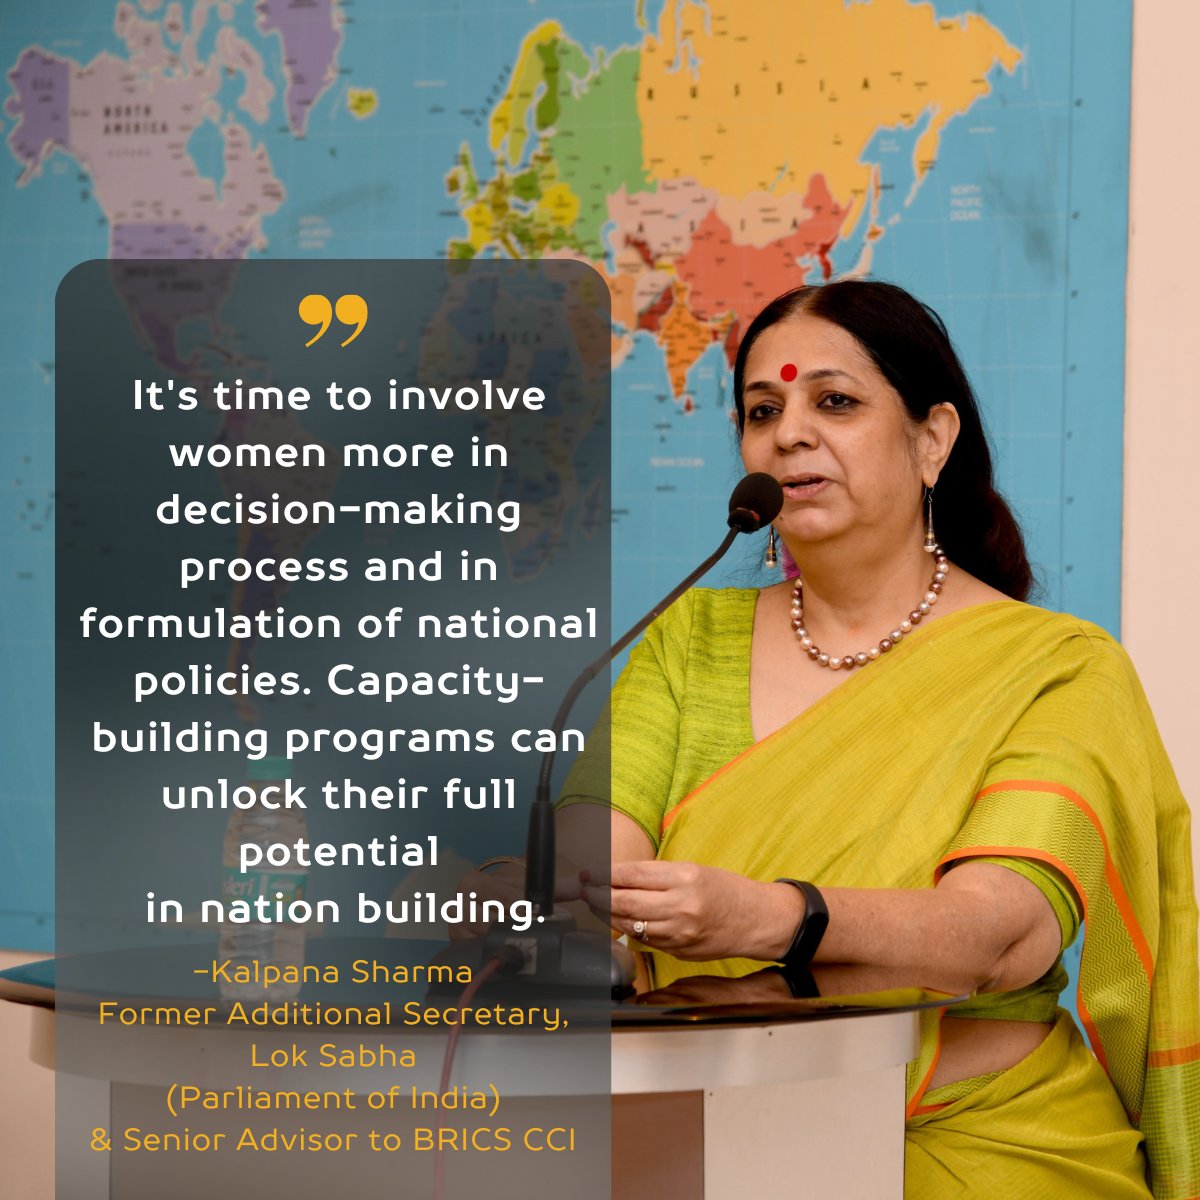 Kalpana Sharma's powerful words ring true: 'Advocacy and awareness, involvement of media and innovative strategies are needed to address unpaid care work at community level.' Read more of her insights in 'The Turning Tide', now available for download. #TheTurningTide